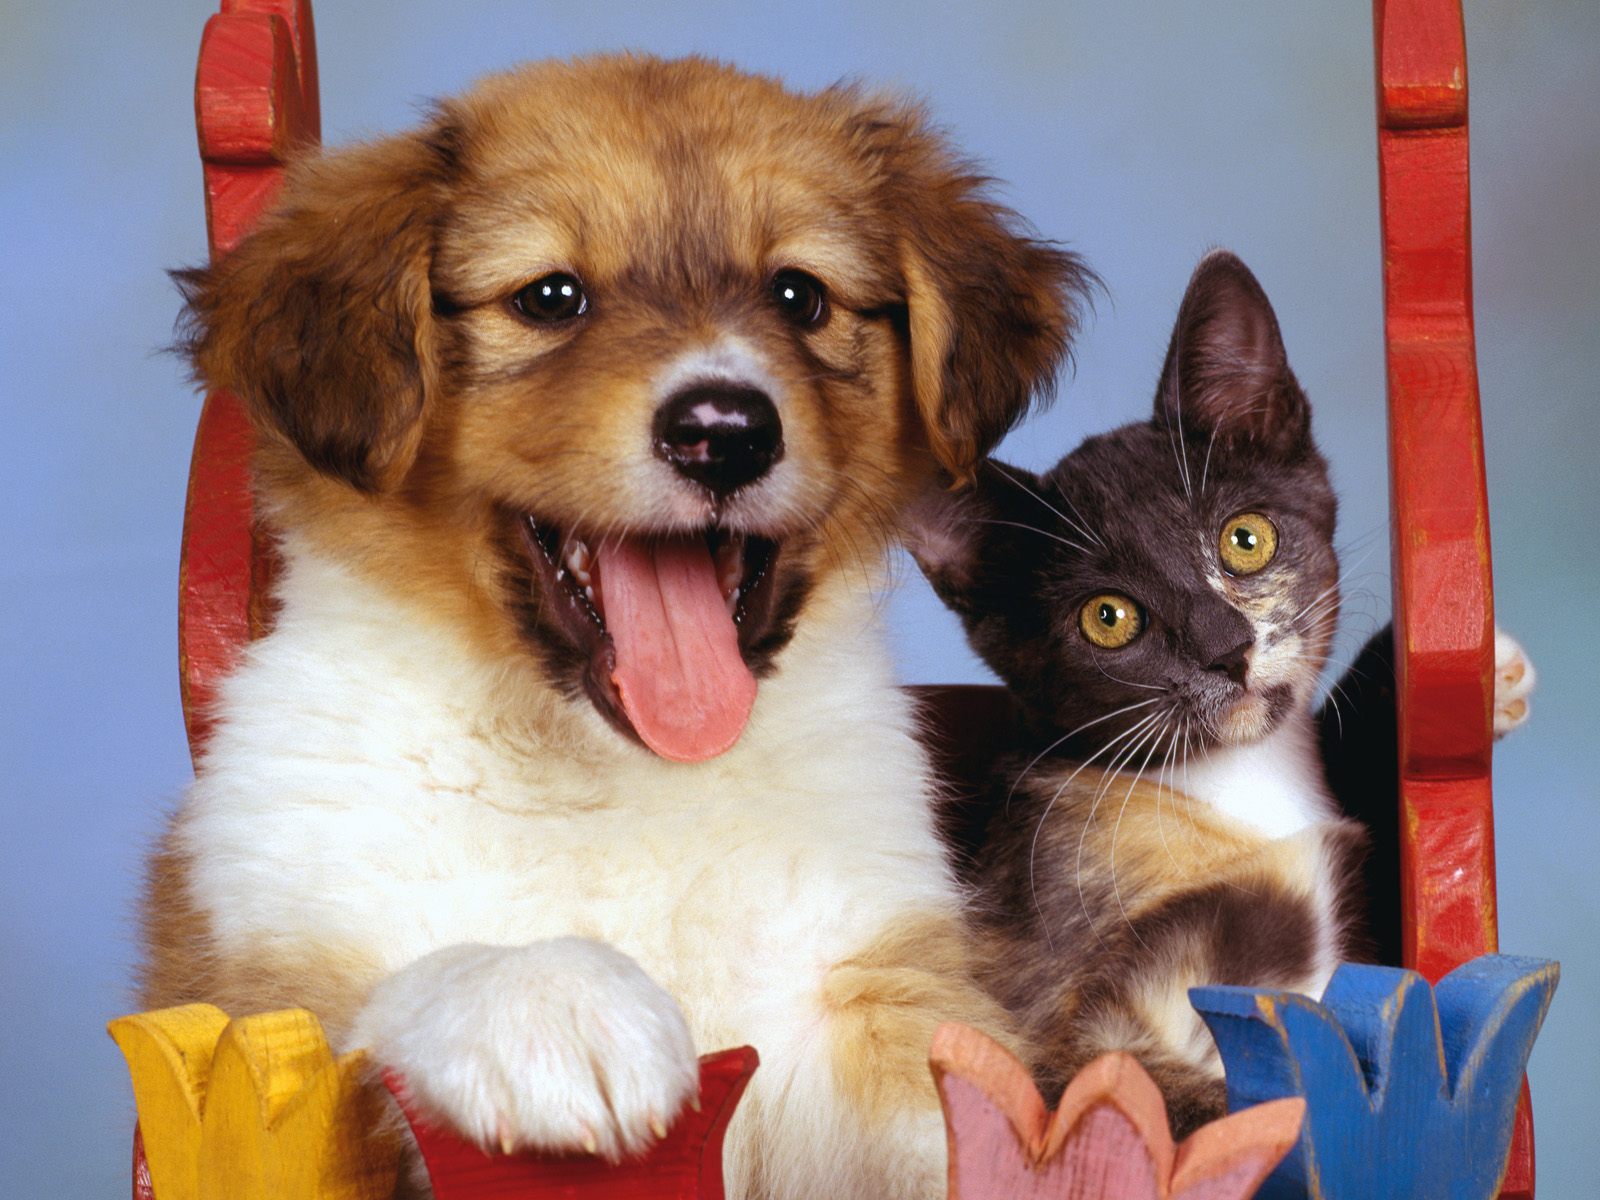  free Get Dogs and Cats Backgrounds Wallpaper and make this wallpaper